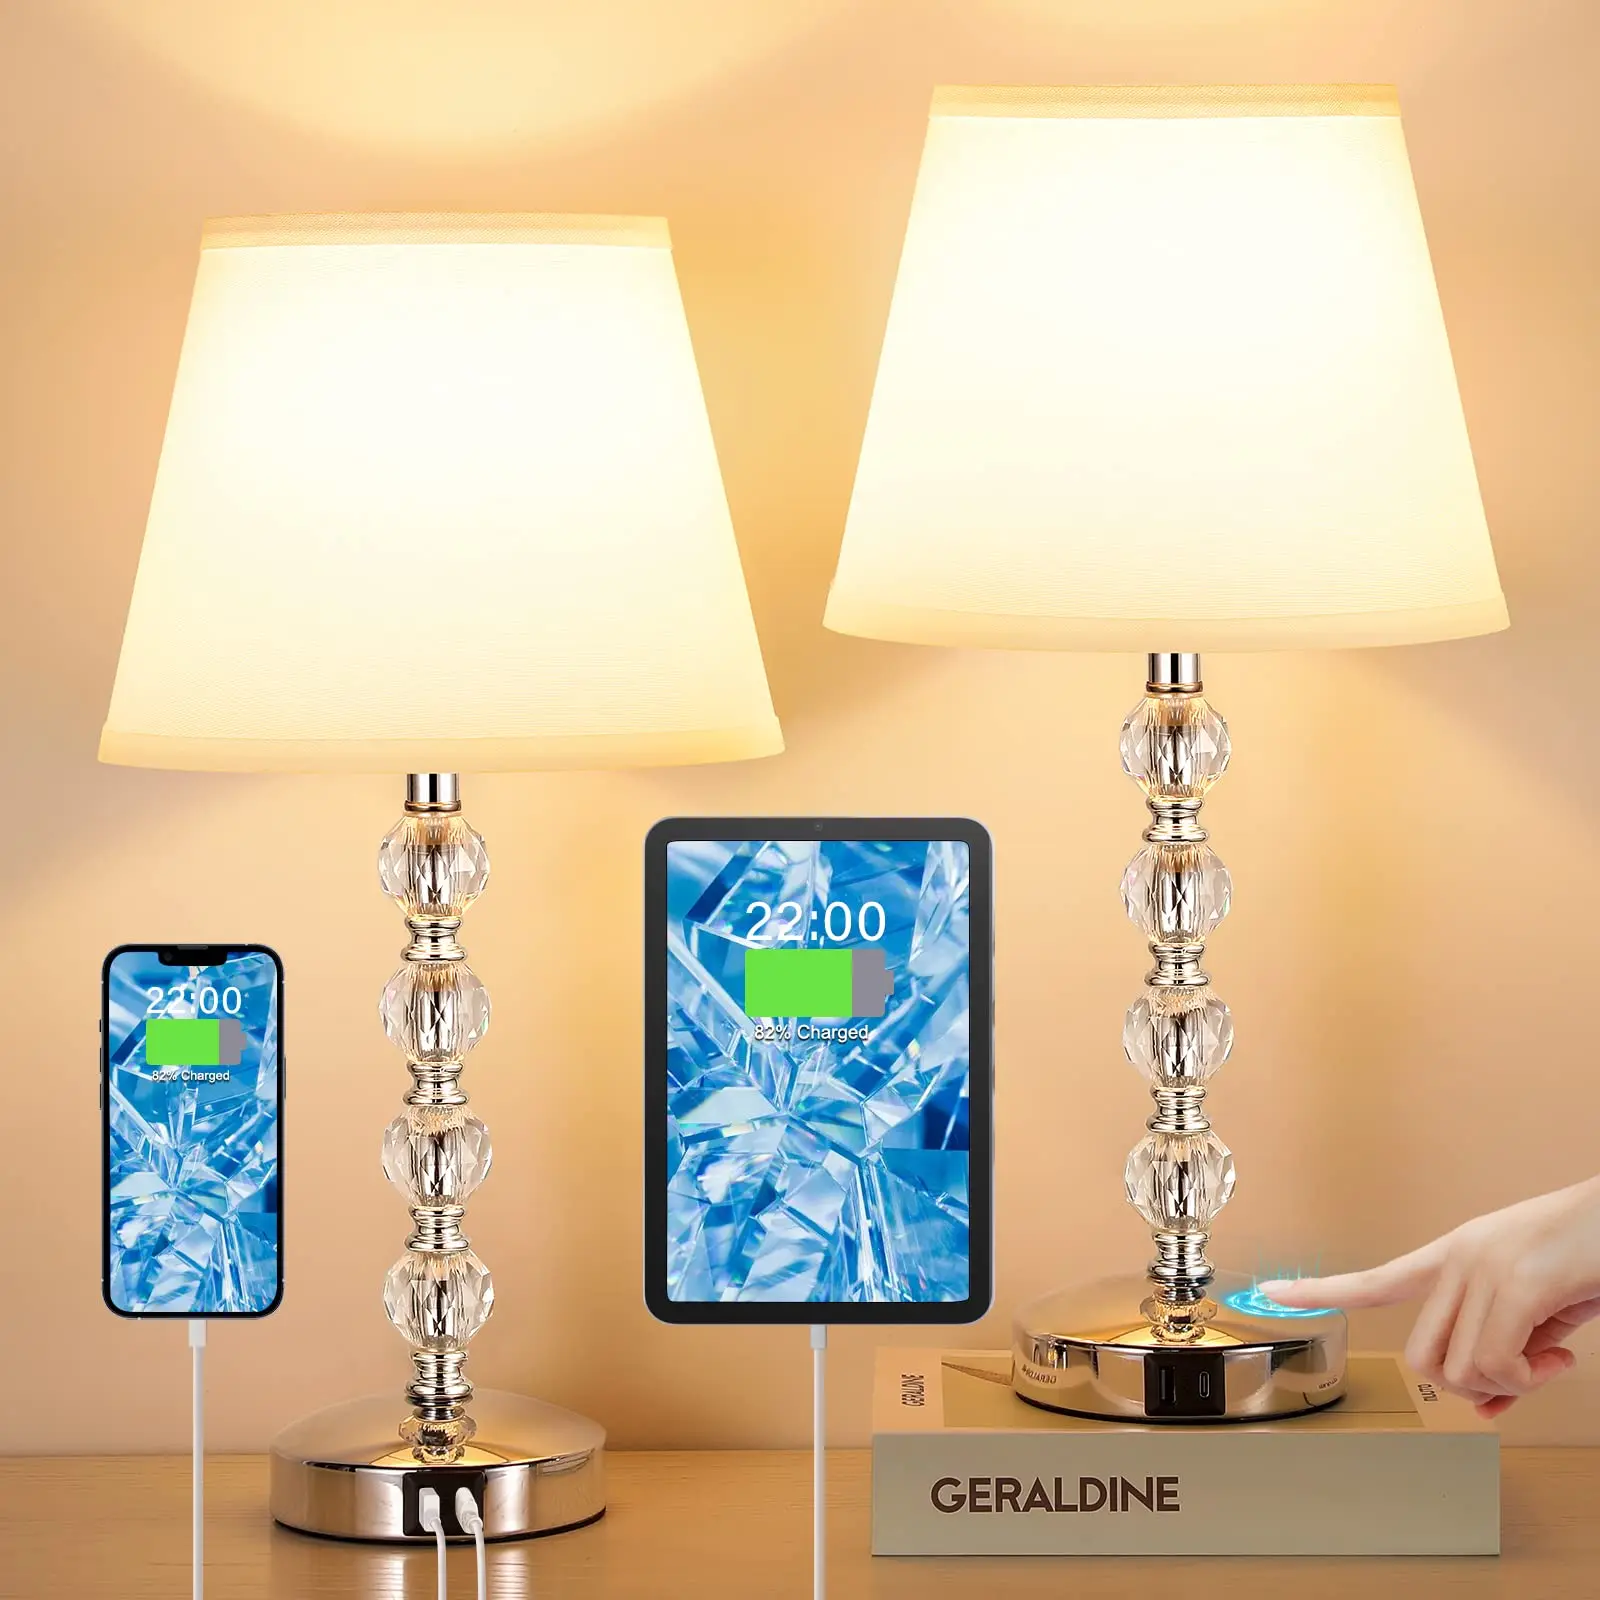 

Rechargeable Lamps for Bedside Touch Control Crystal Table Lamp Bedroom Light with USB Charging Ports Lampshade Writing Lamp